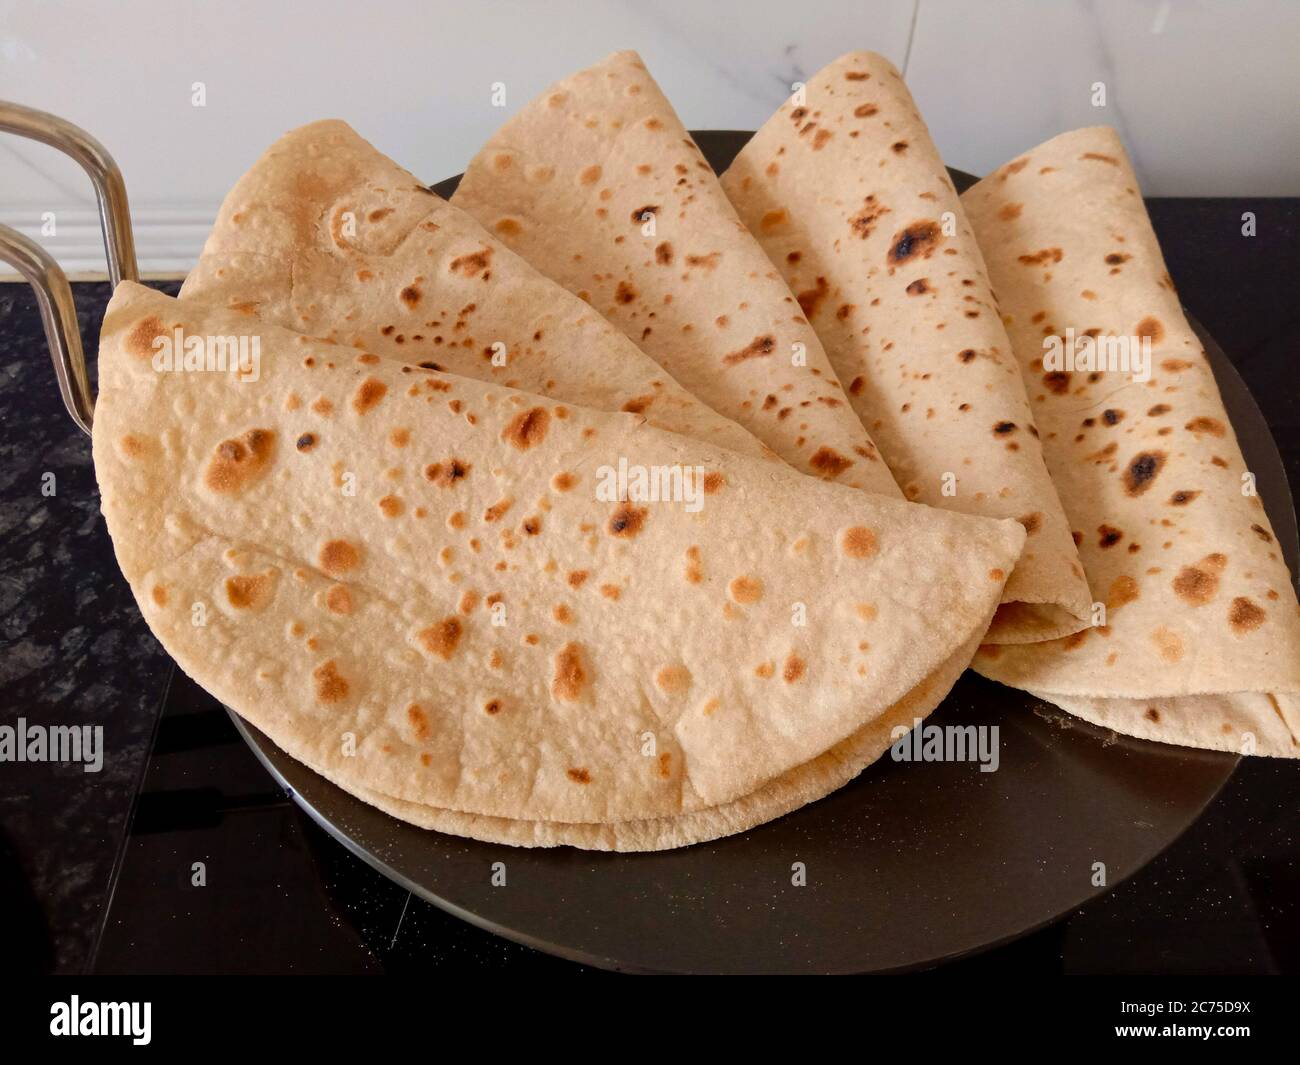 indian bread or roti made from whole wheat flour or refind flour without added yeast Stock Photo